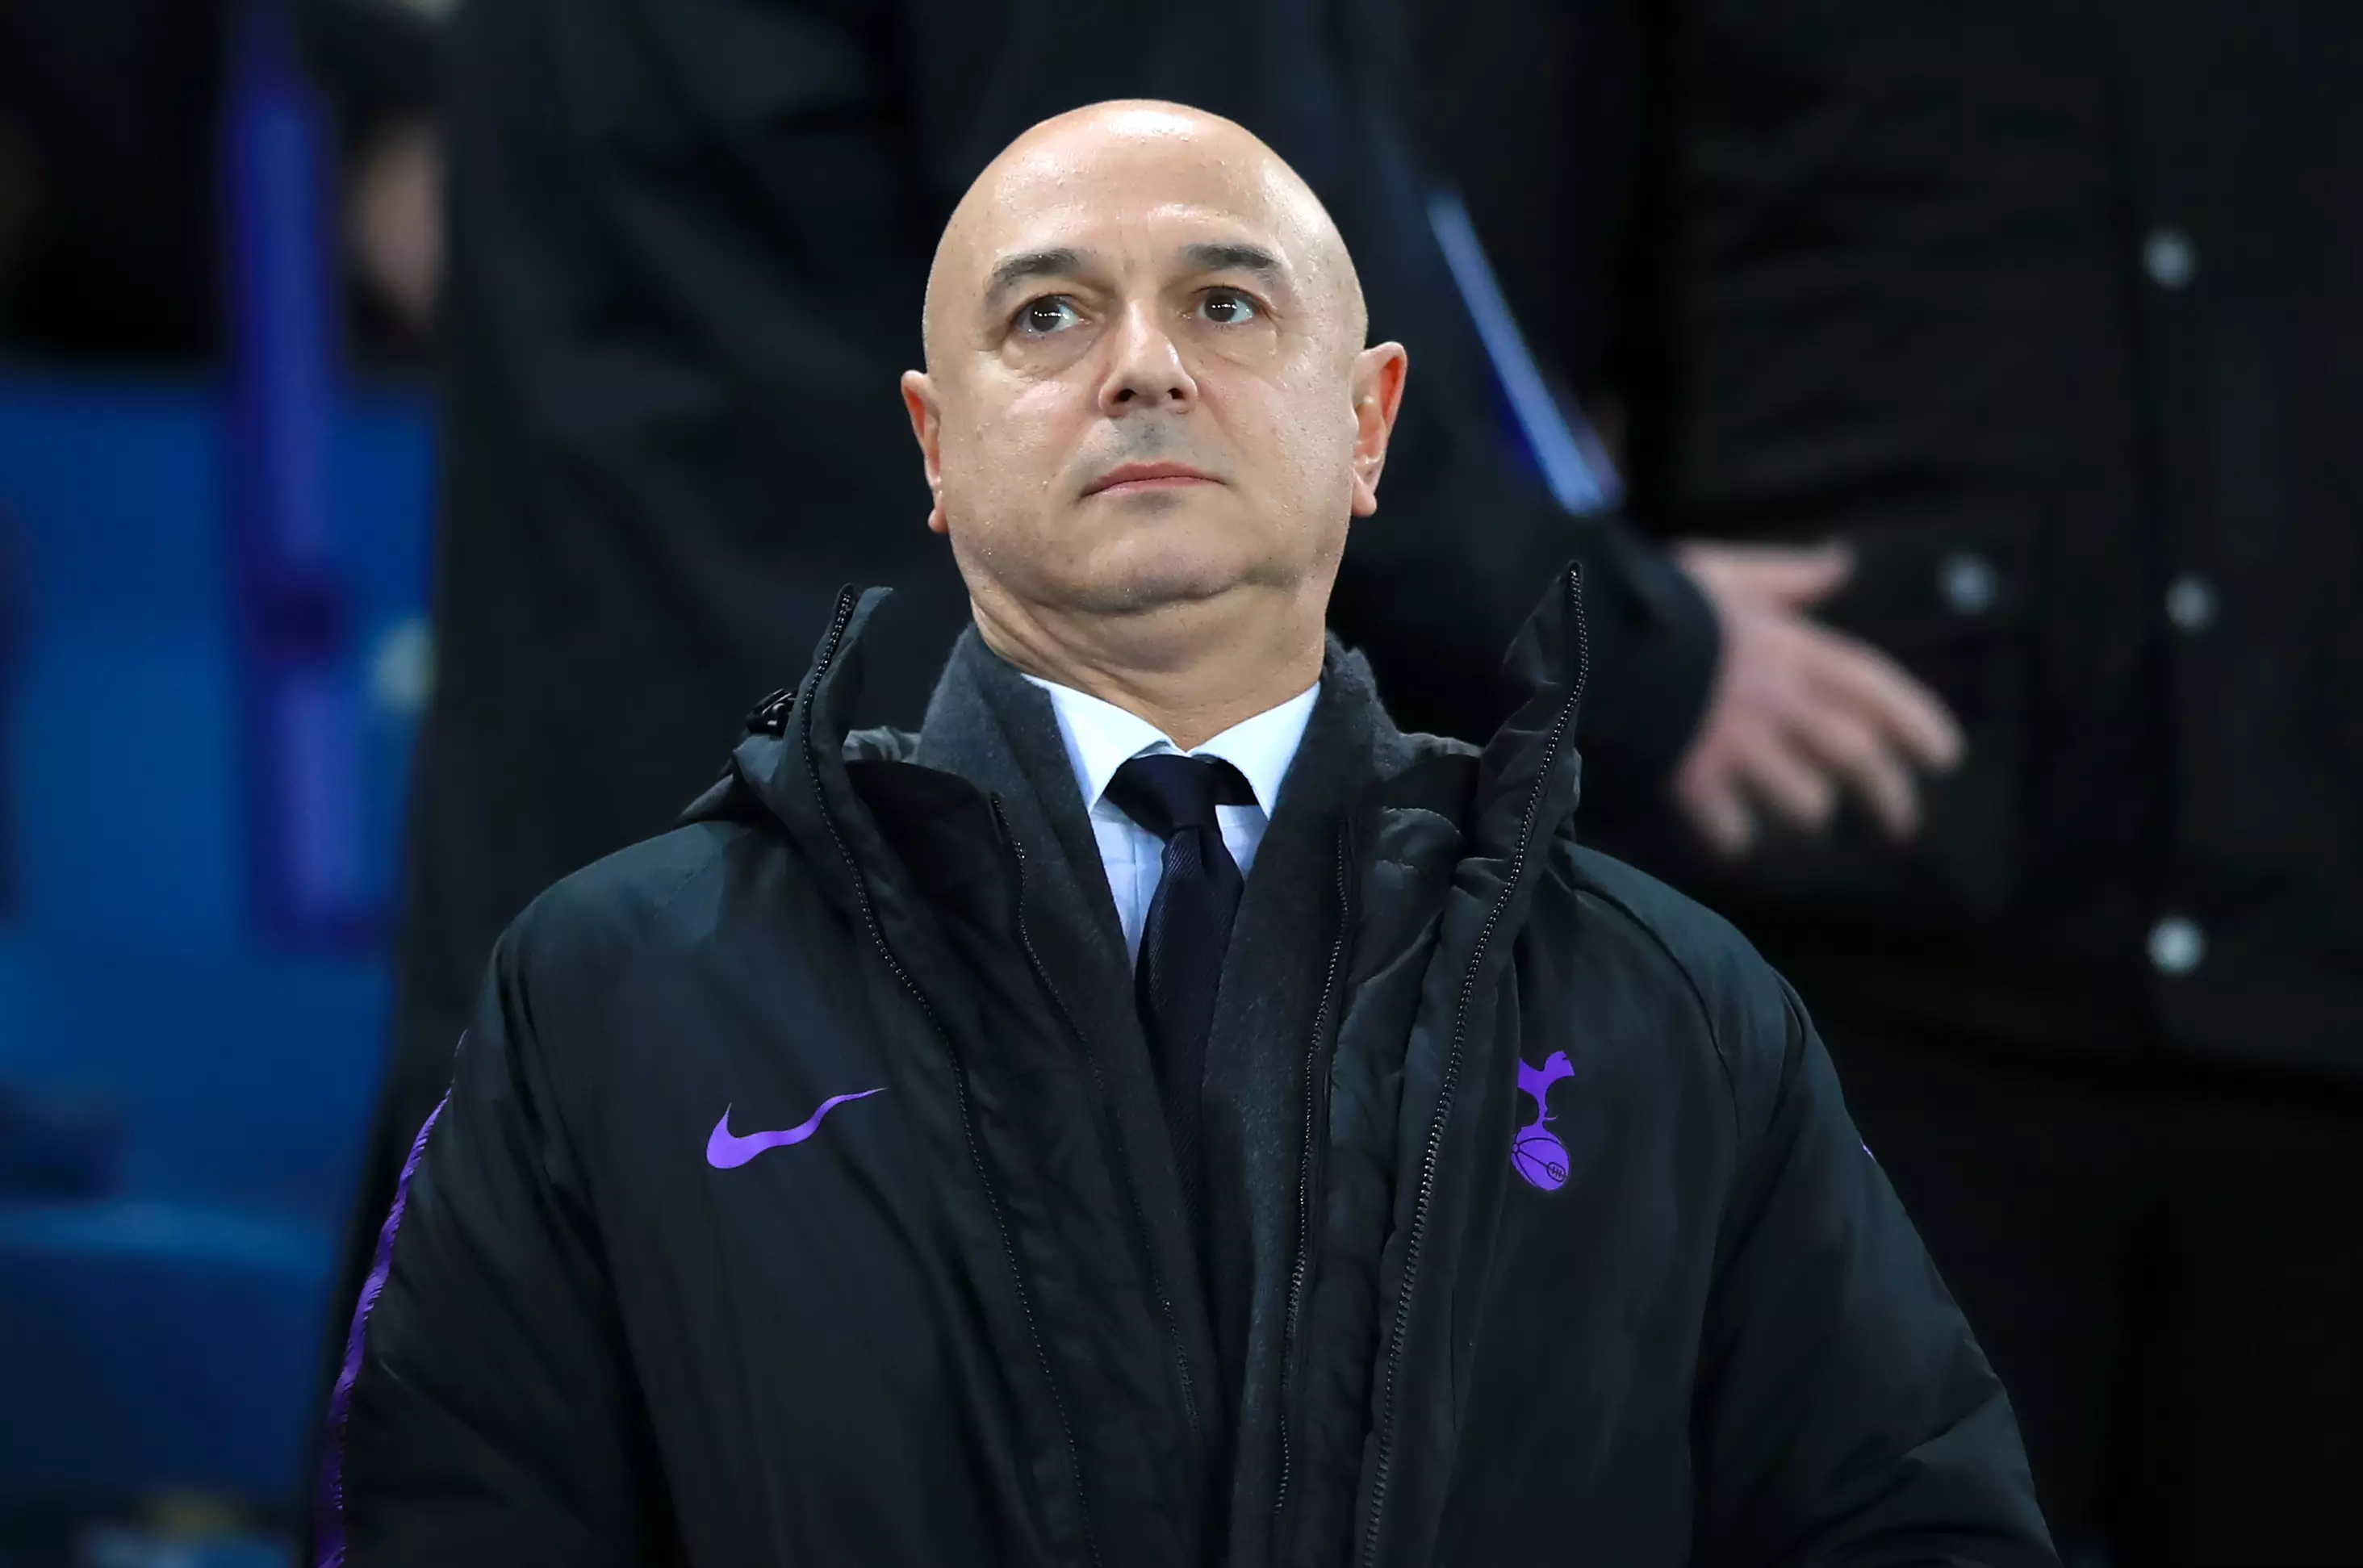 It's been a difficult few months for Levy. Image: PA Images